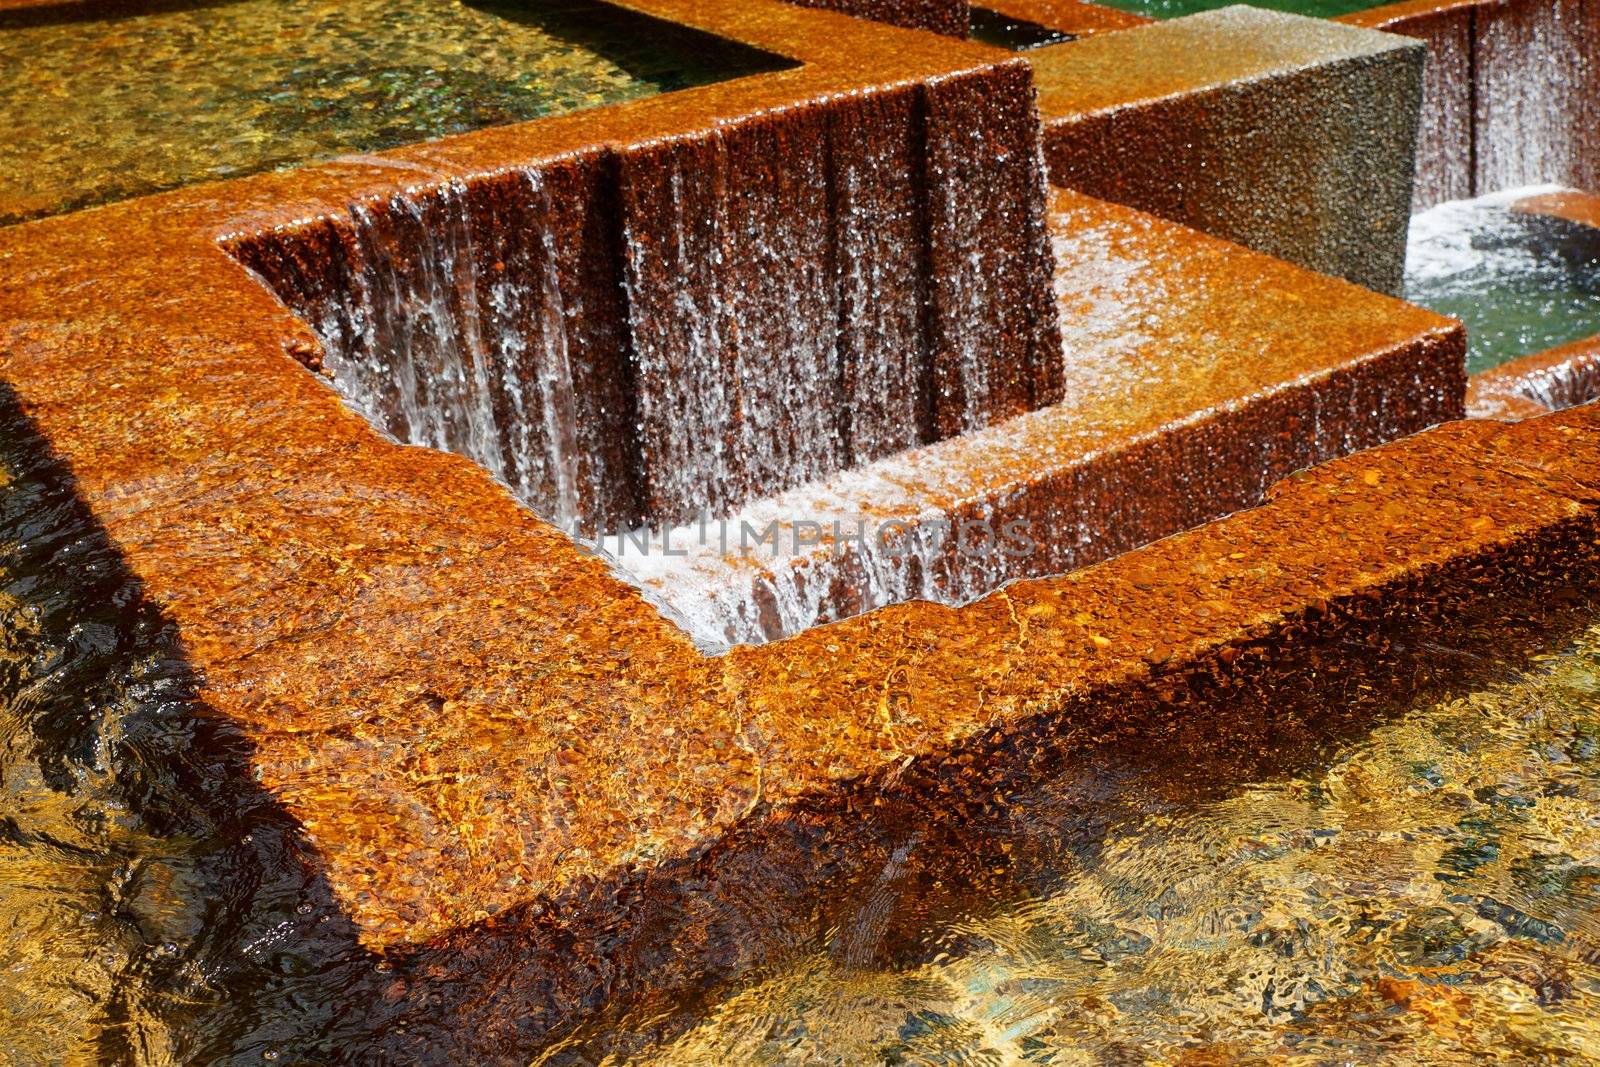 Multiple pools with water falls over golden concrete walls